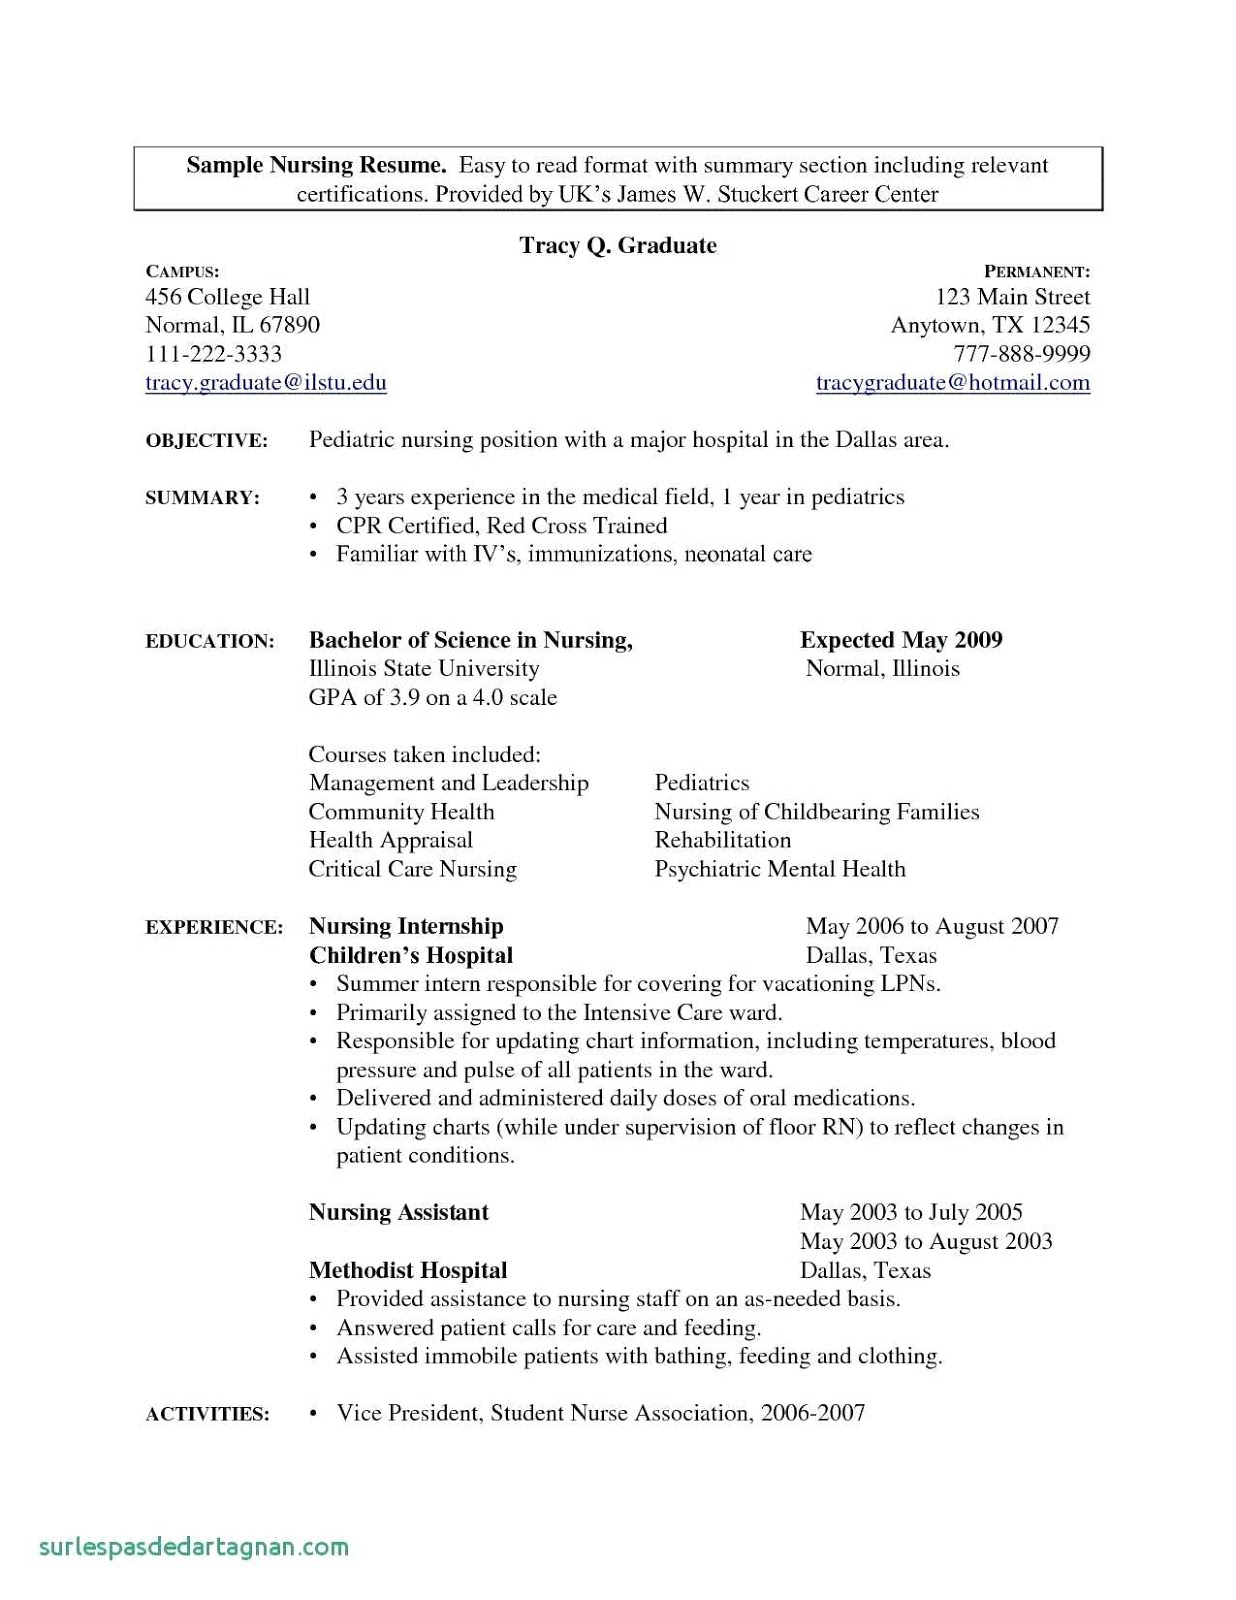 Administrative Assistant Resume, administrative assistant resume summary, administrative assistant resume examples